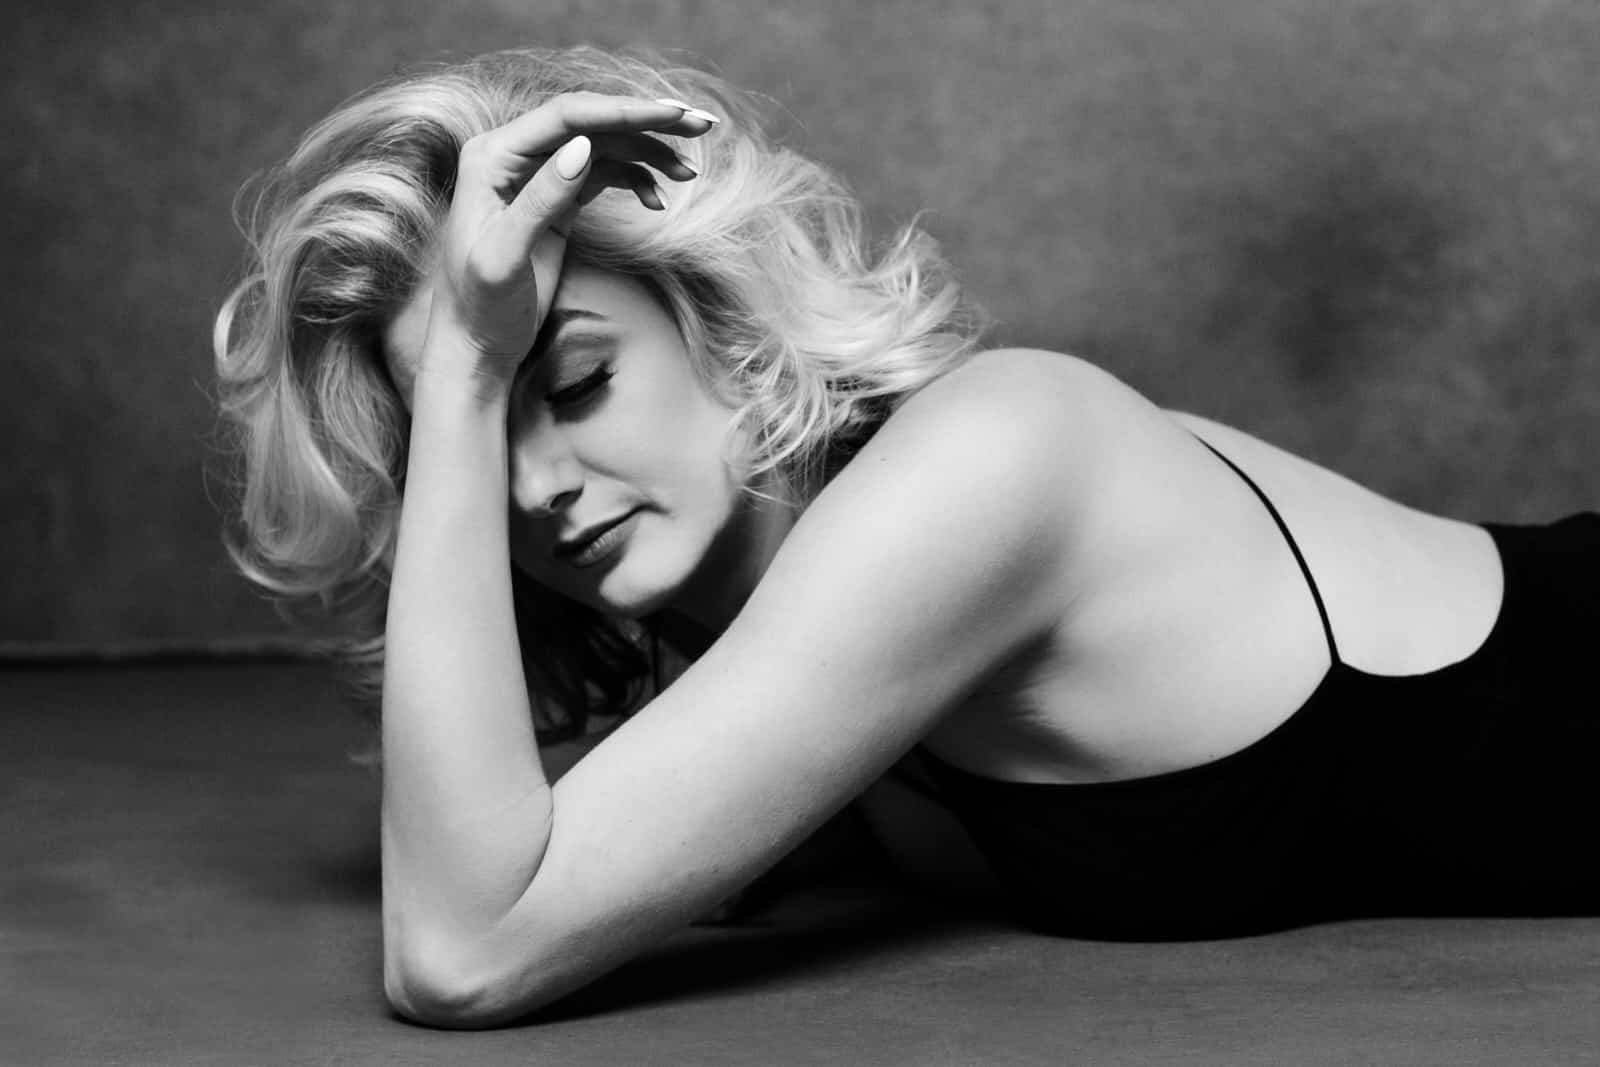 Vancouver Boudoir photoshoot with Black and white artistic timeless portraits of blonde woman with an edgy vibe